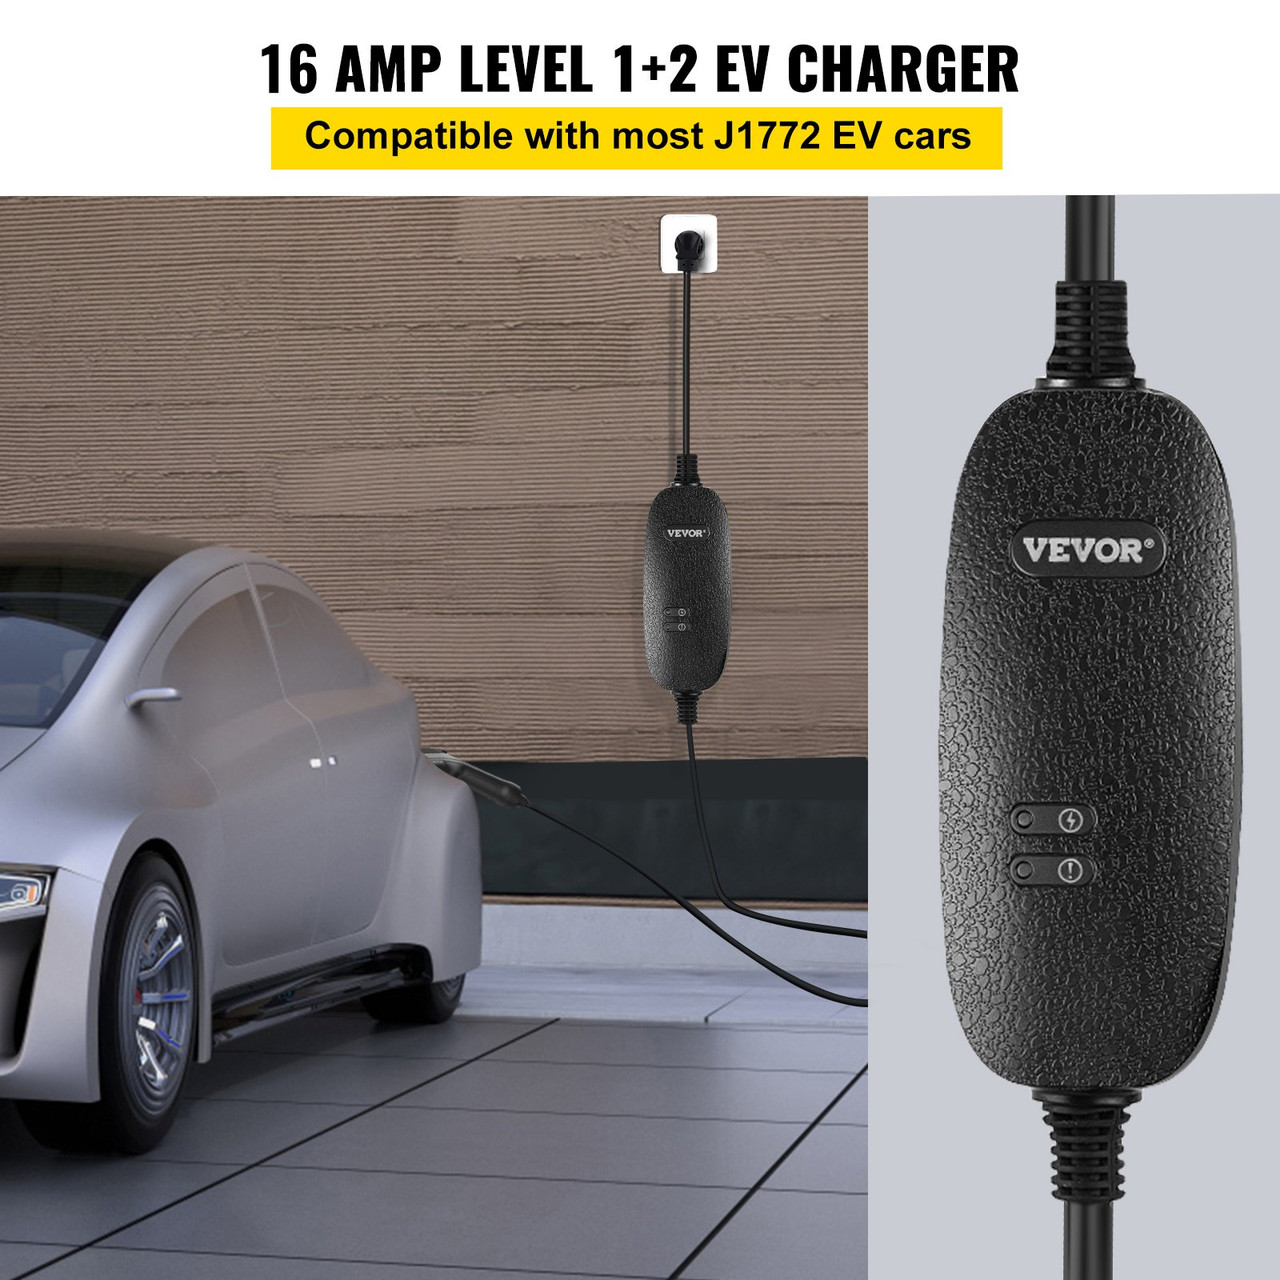 Level 1+2 EV Charger, 15 Amp 110-240V, Portable Electric Vehicle Charger with 25 ft Charging Cable NEMA 6-20 Plug NEMA 5-15 Adapter, Plug-in Home EV